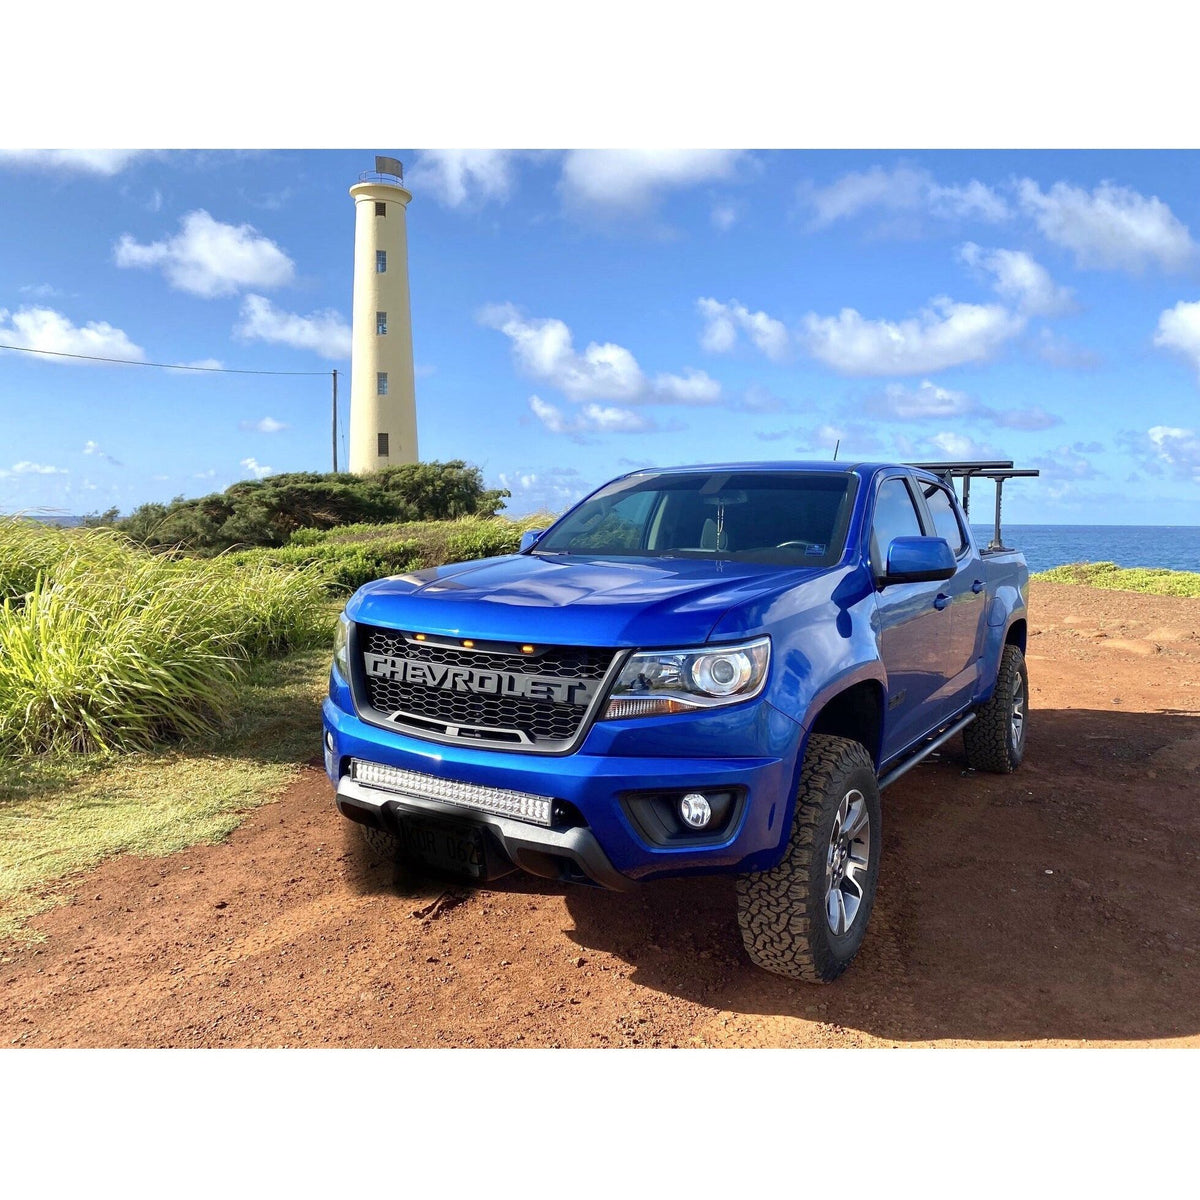 2015-2019 Chevrolet Colorado | Raptor Style Grille - Truck Accessories Guy